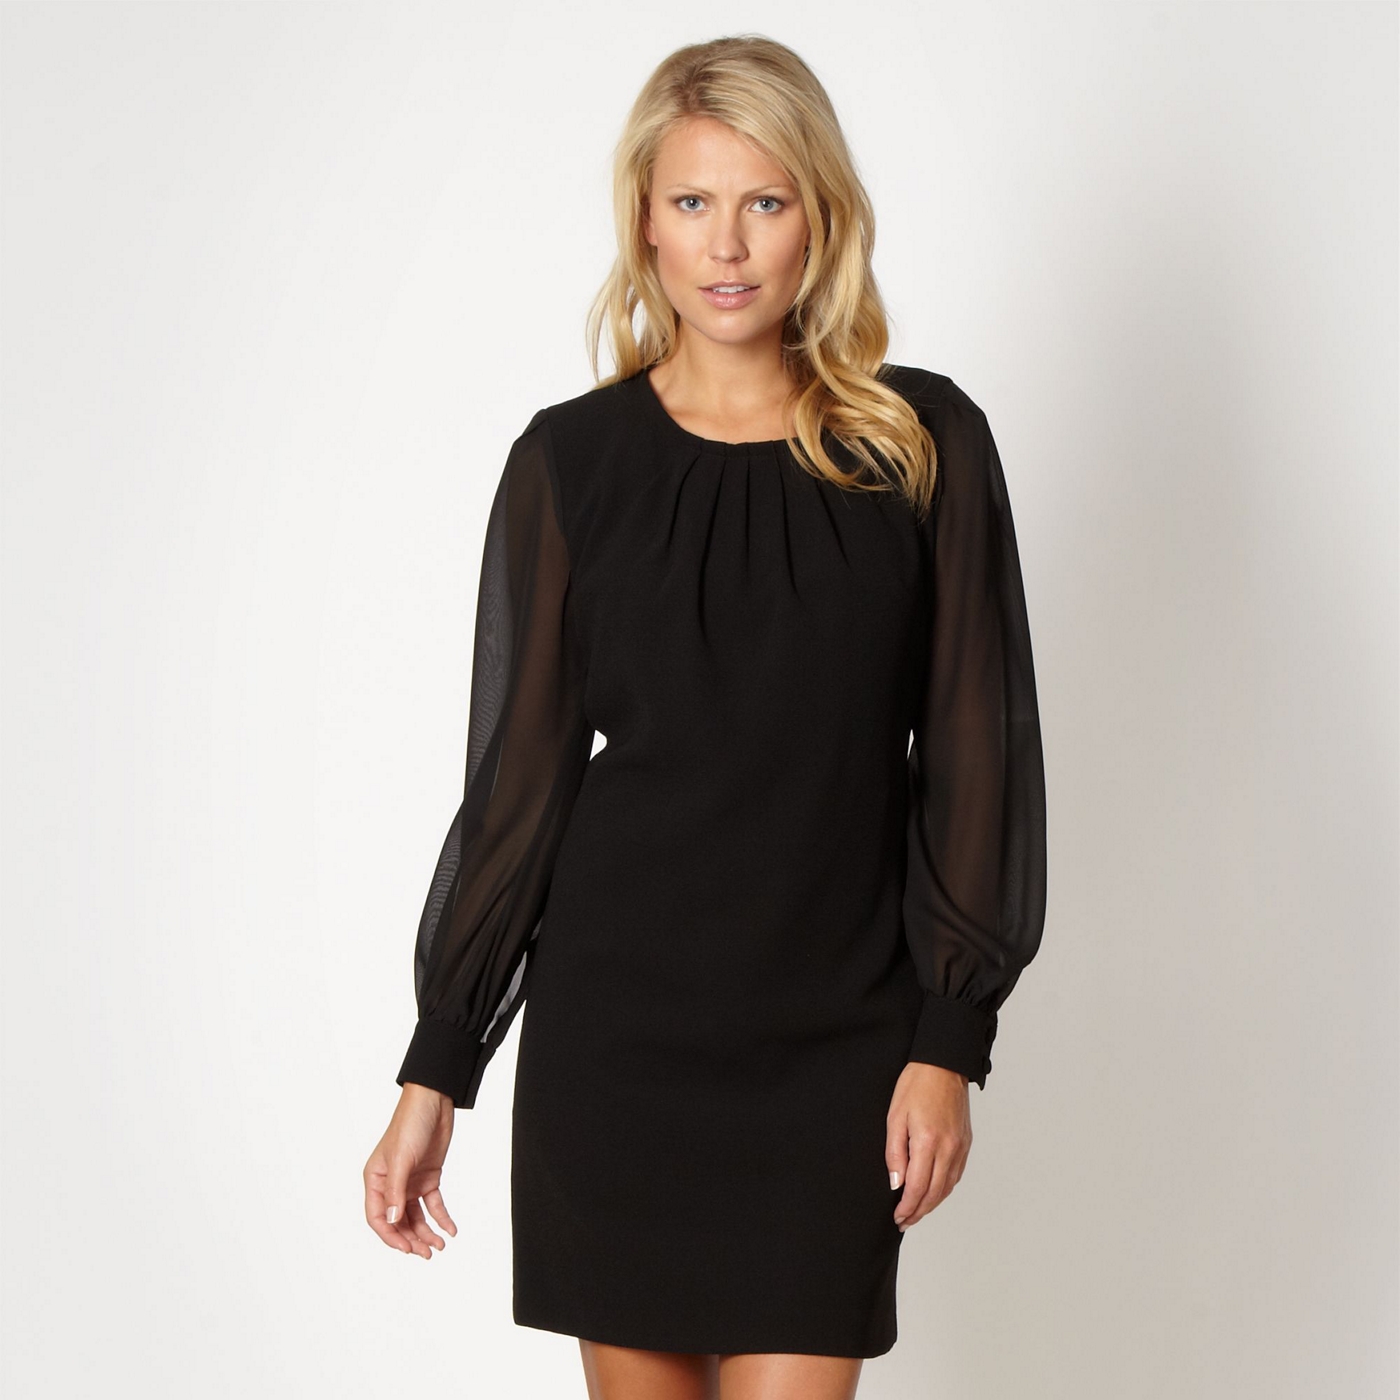 The Collection Black pleated crepe dress